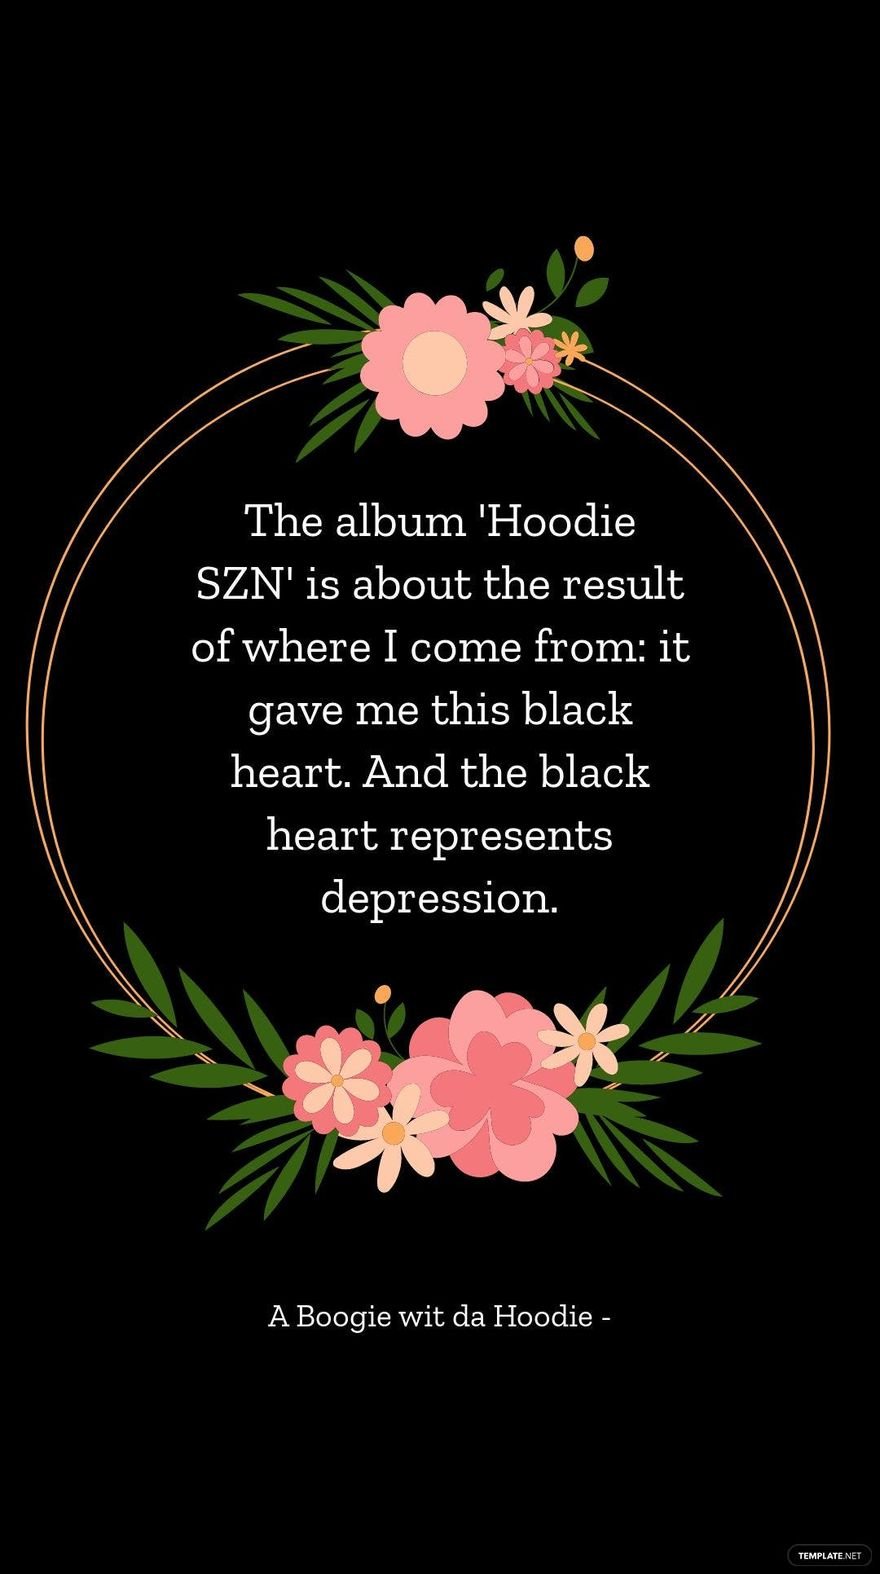 A Boogie wit da Hoodie - The album 'Hoodie SZN' is about the result of where I come from: it gave me this black heart. And the black heart represents depression.